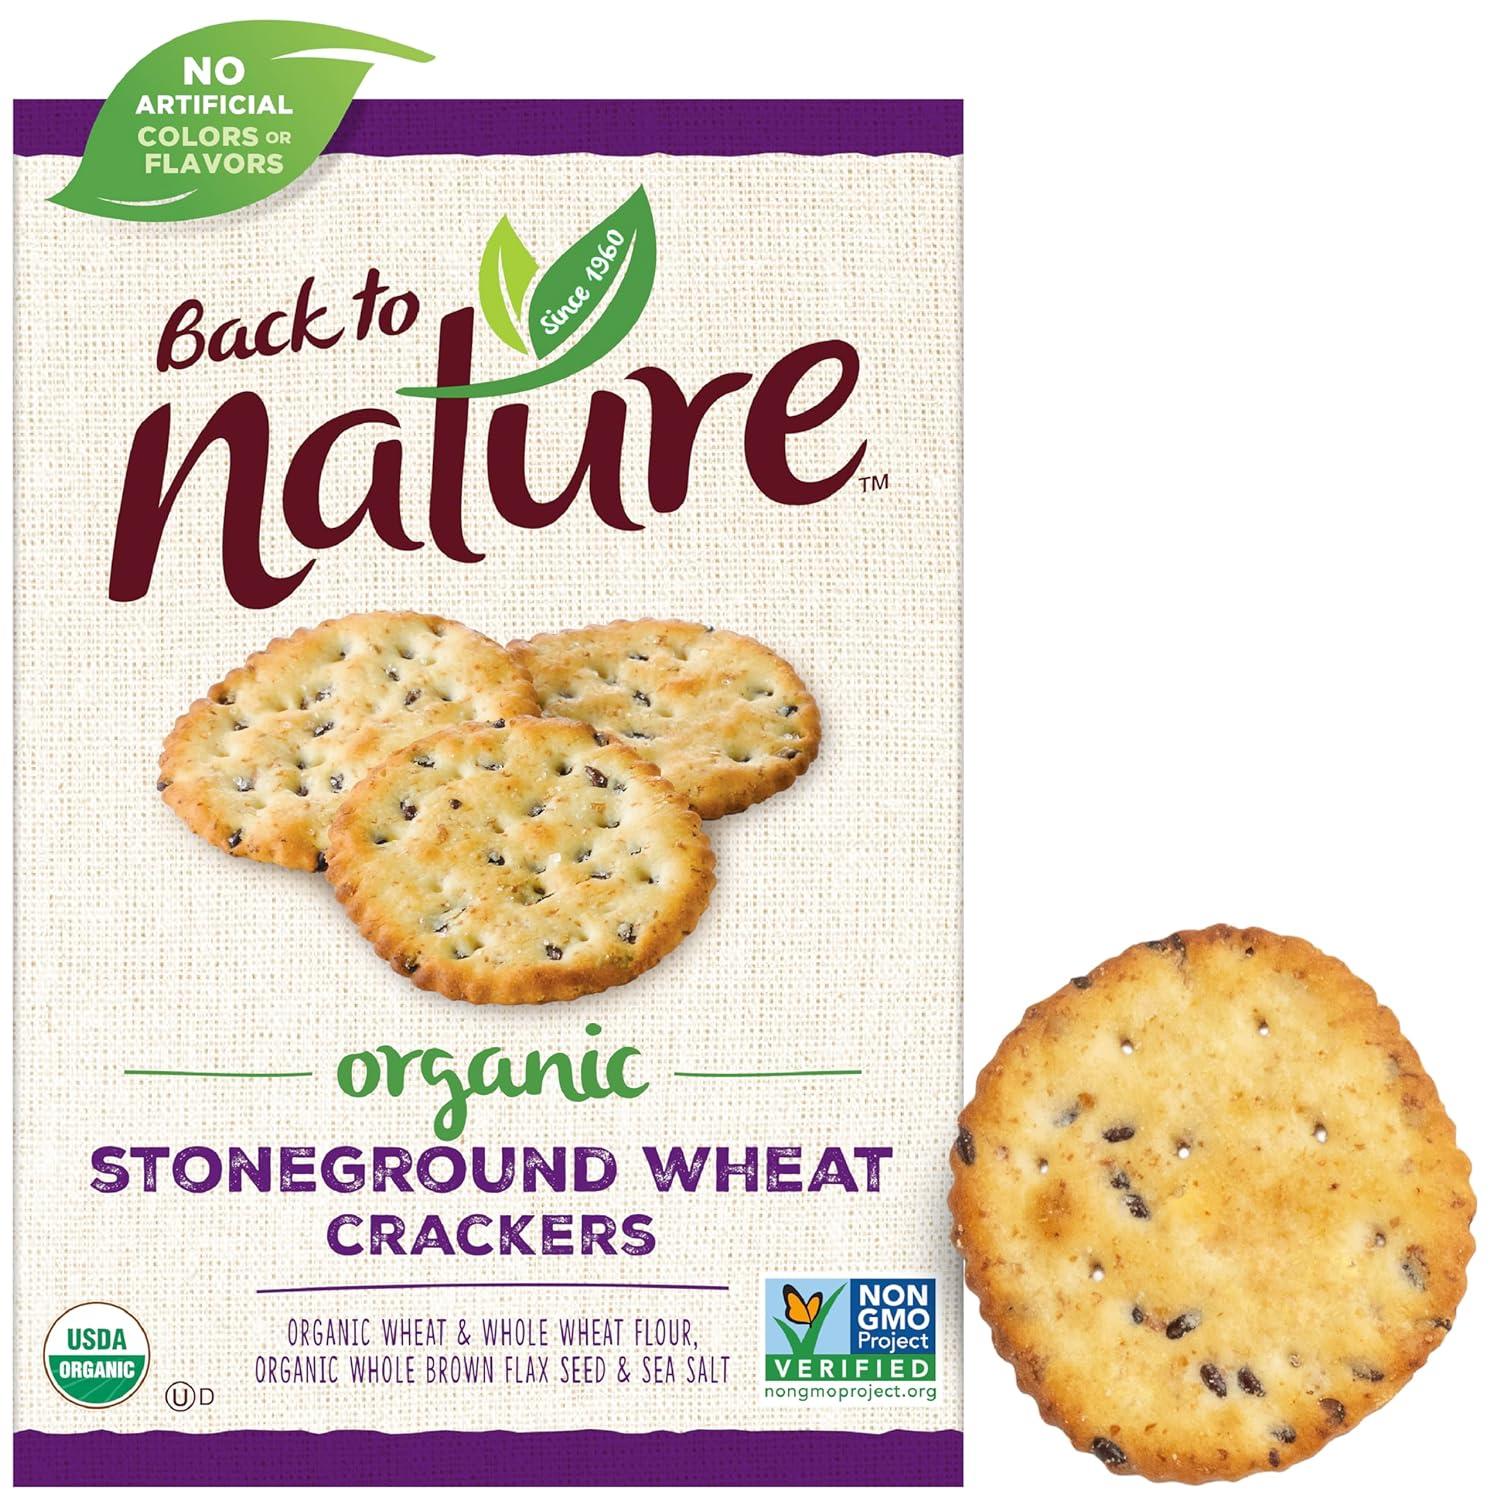 Back to Nature Organic Stoneground Wheat Crackers for $2.03